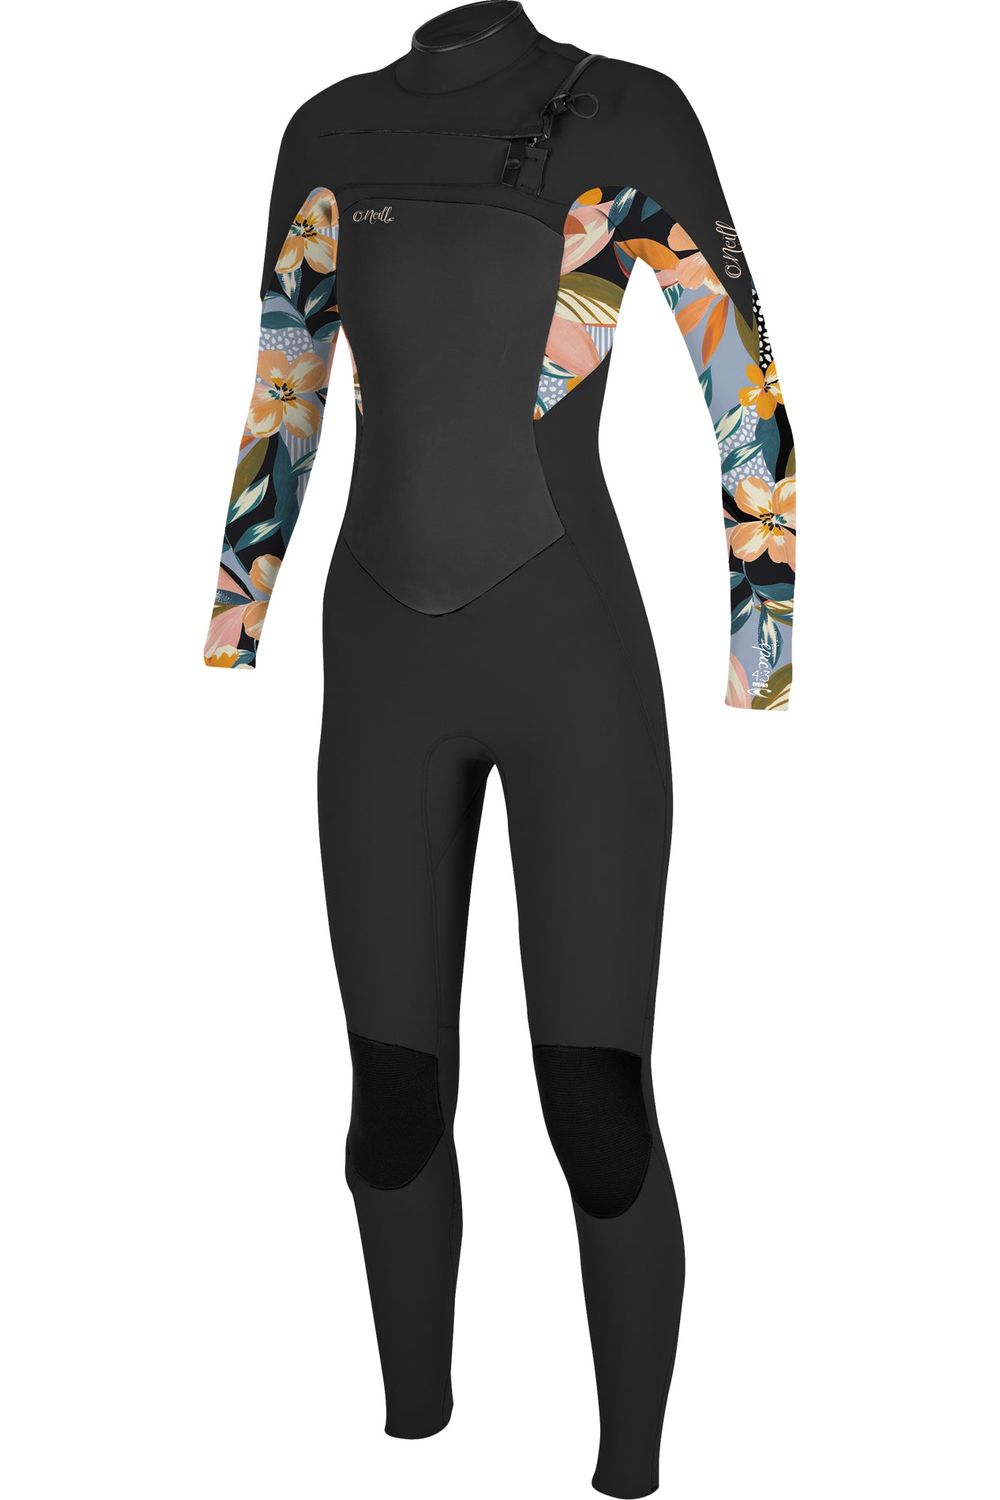 O'Neill Womens Epic Wetsuit 4/3 Chest Zip Full Wetsuit Black Demiflor